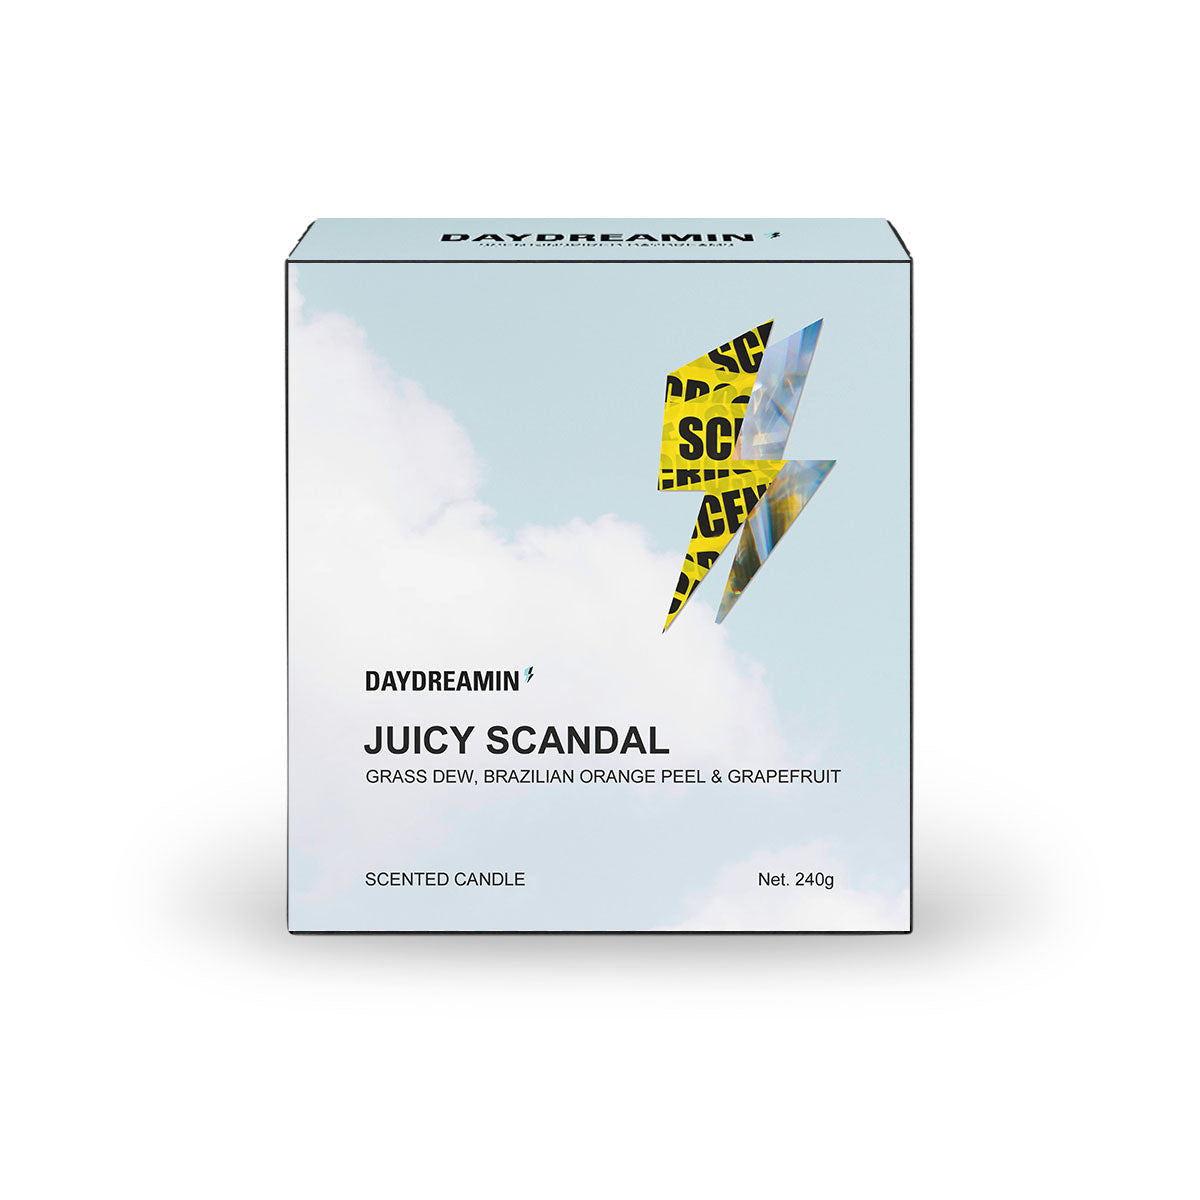 Juicy Scandal Scented Candle by DAYDREAMIN' UK | Gift Box